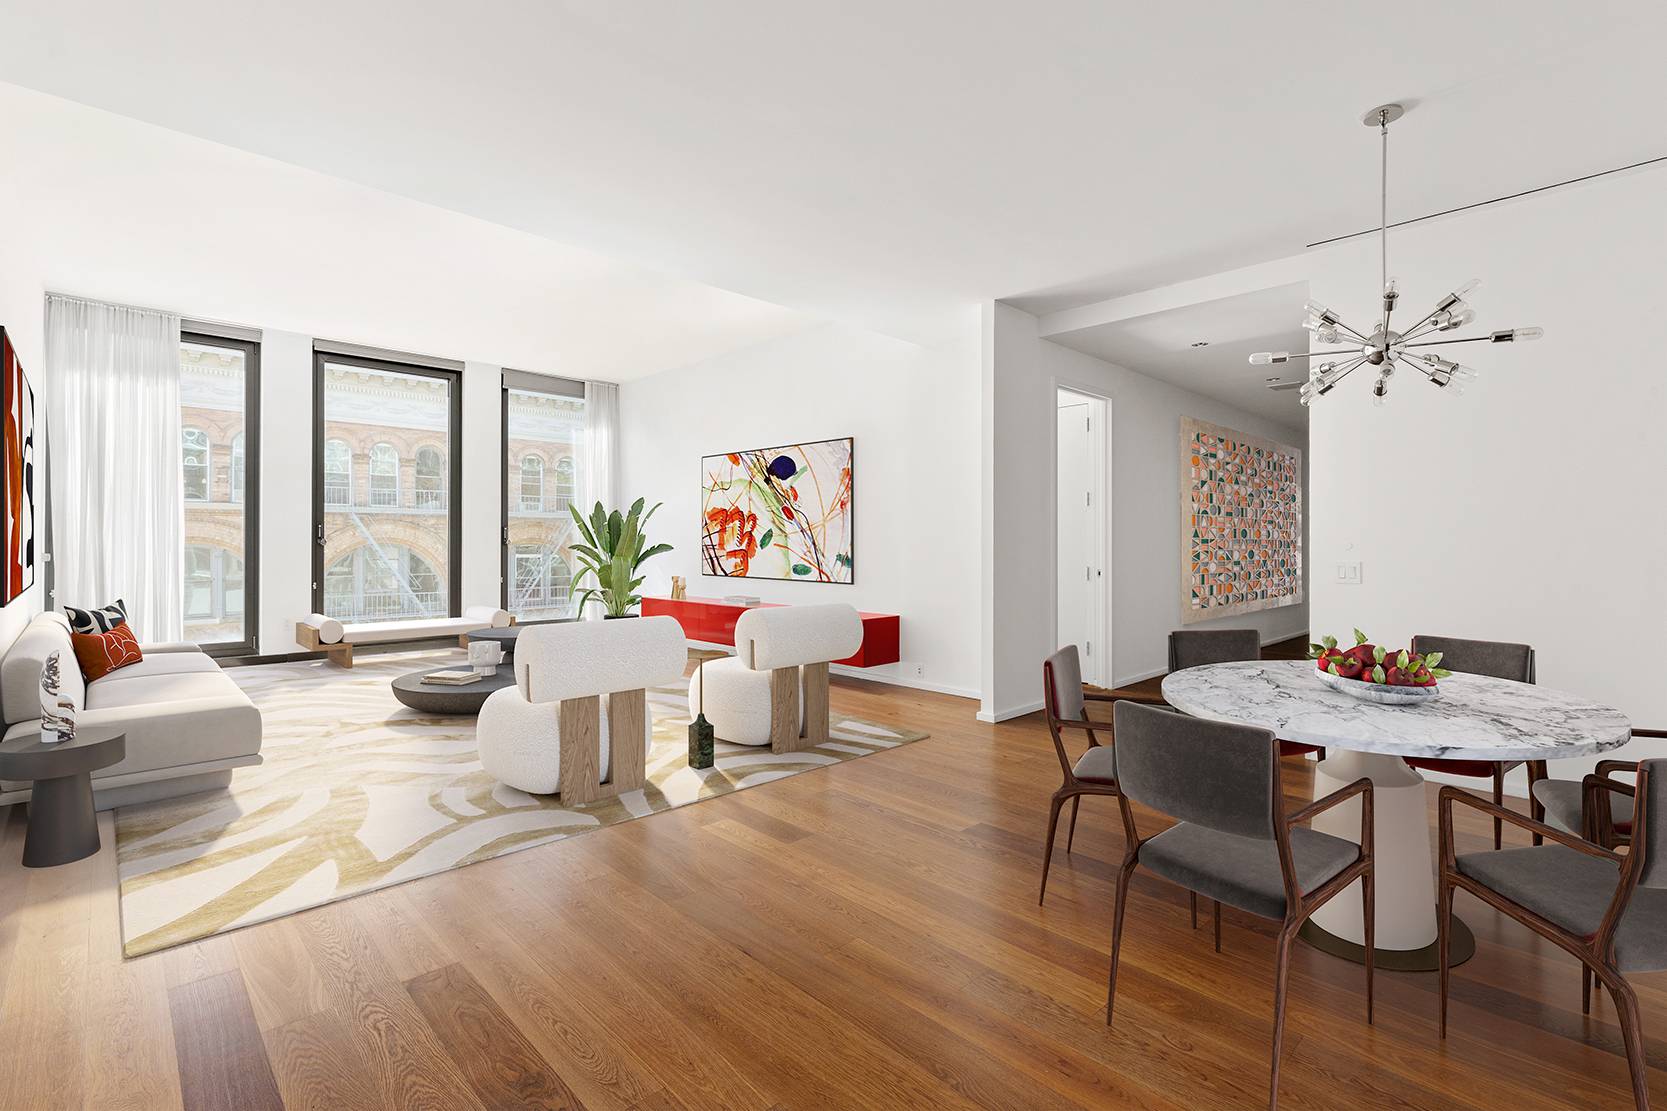 SIGNED LEASE. Move right in to this sun filled, lofty residence in the middle of New York City's coolest block Bond Street !